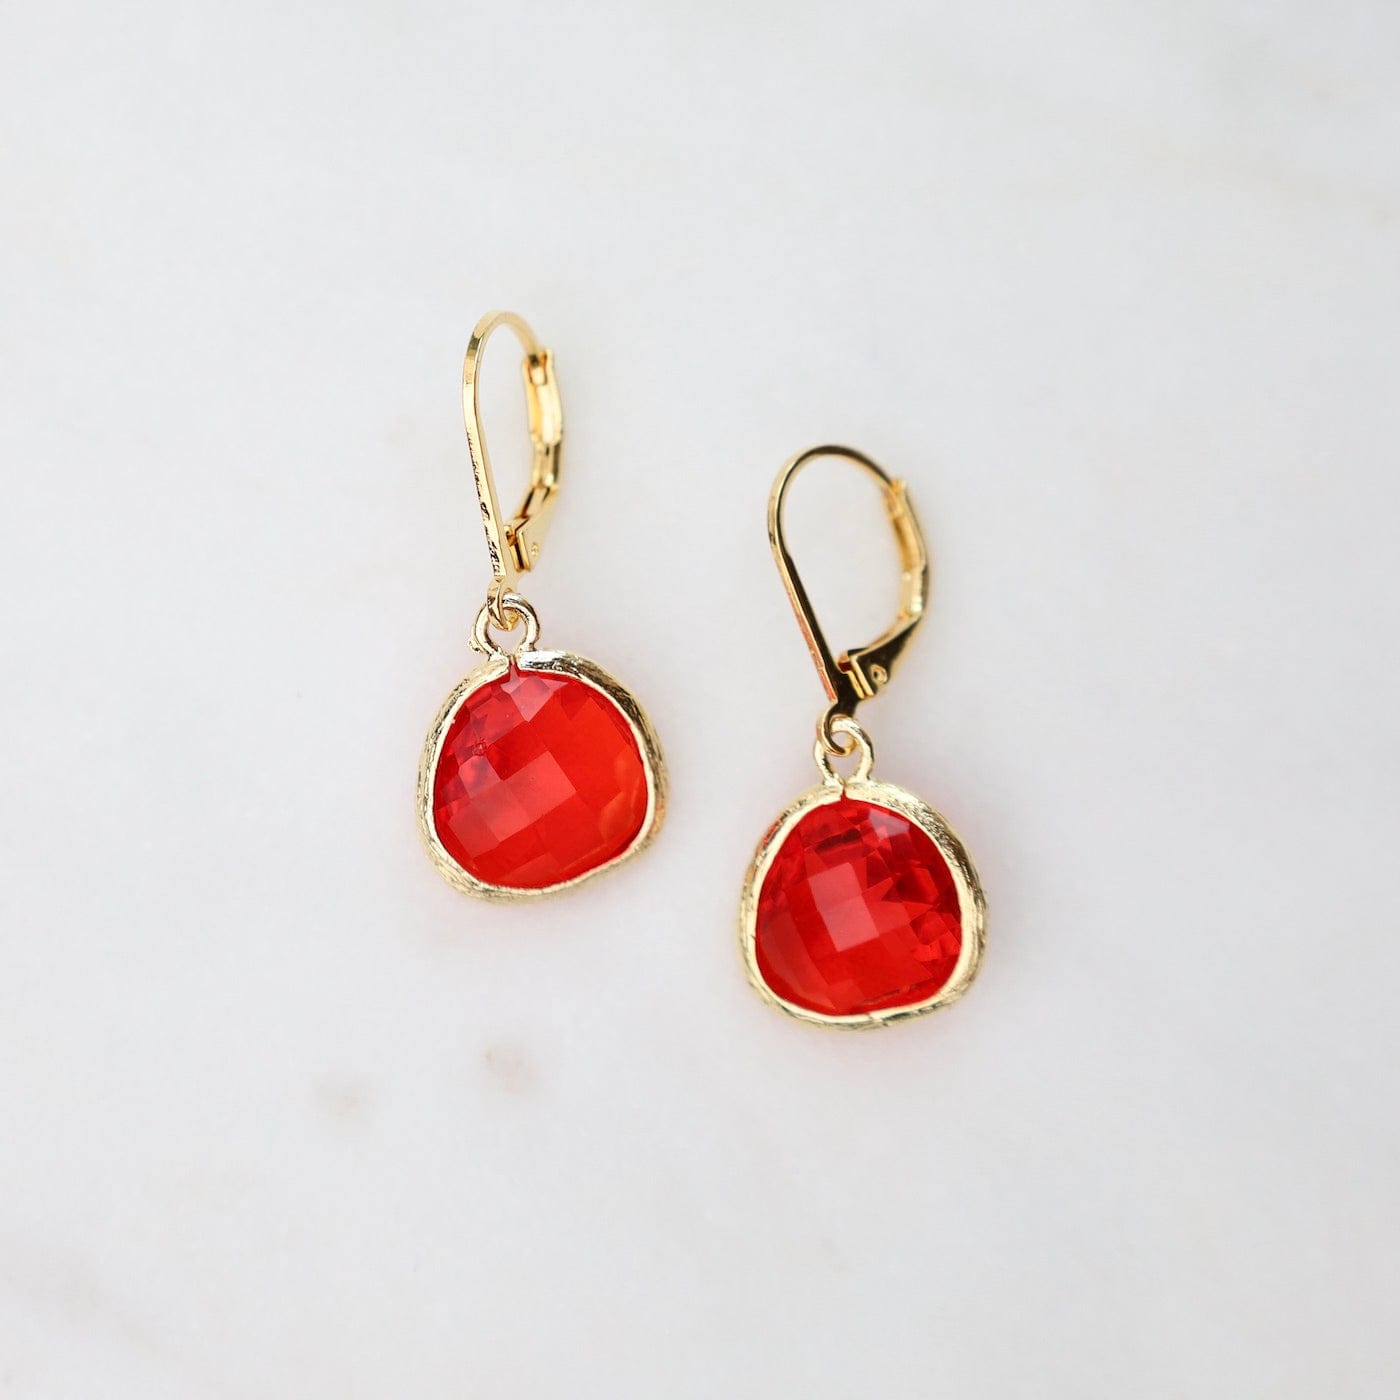 EAR-GPL Gold Plated Crystal Lever Back Earrings - Red